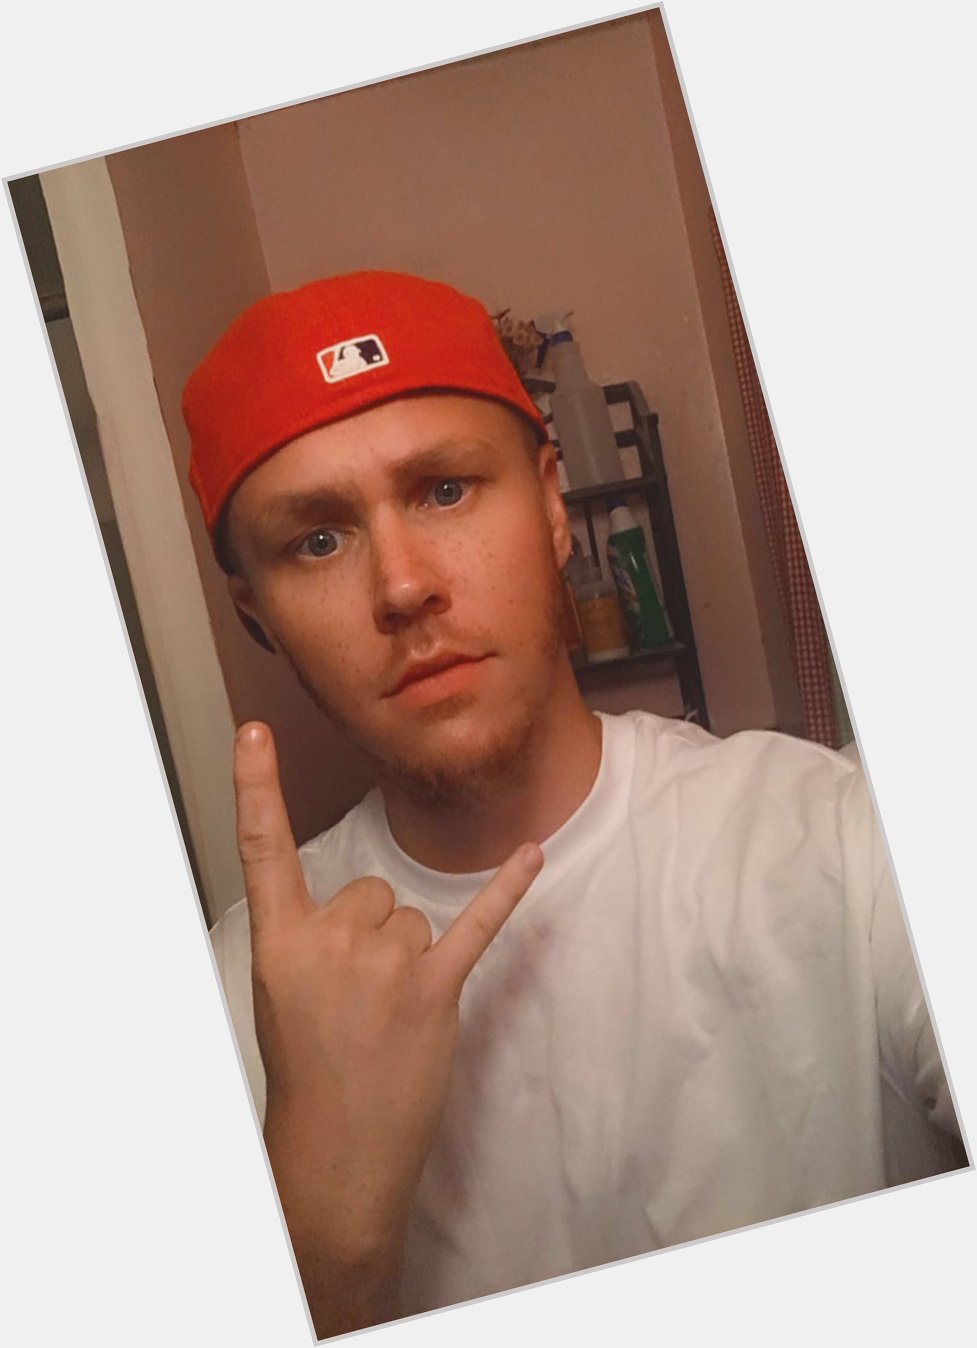 Does this make me a cosplay streamer now?

Anyway, happy 52nd birthday & get well soon to Fred Durst of Limp Bizkit! 